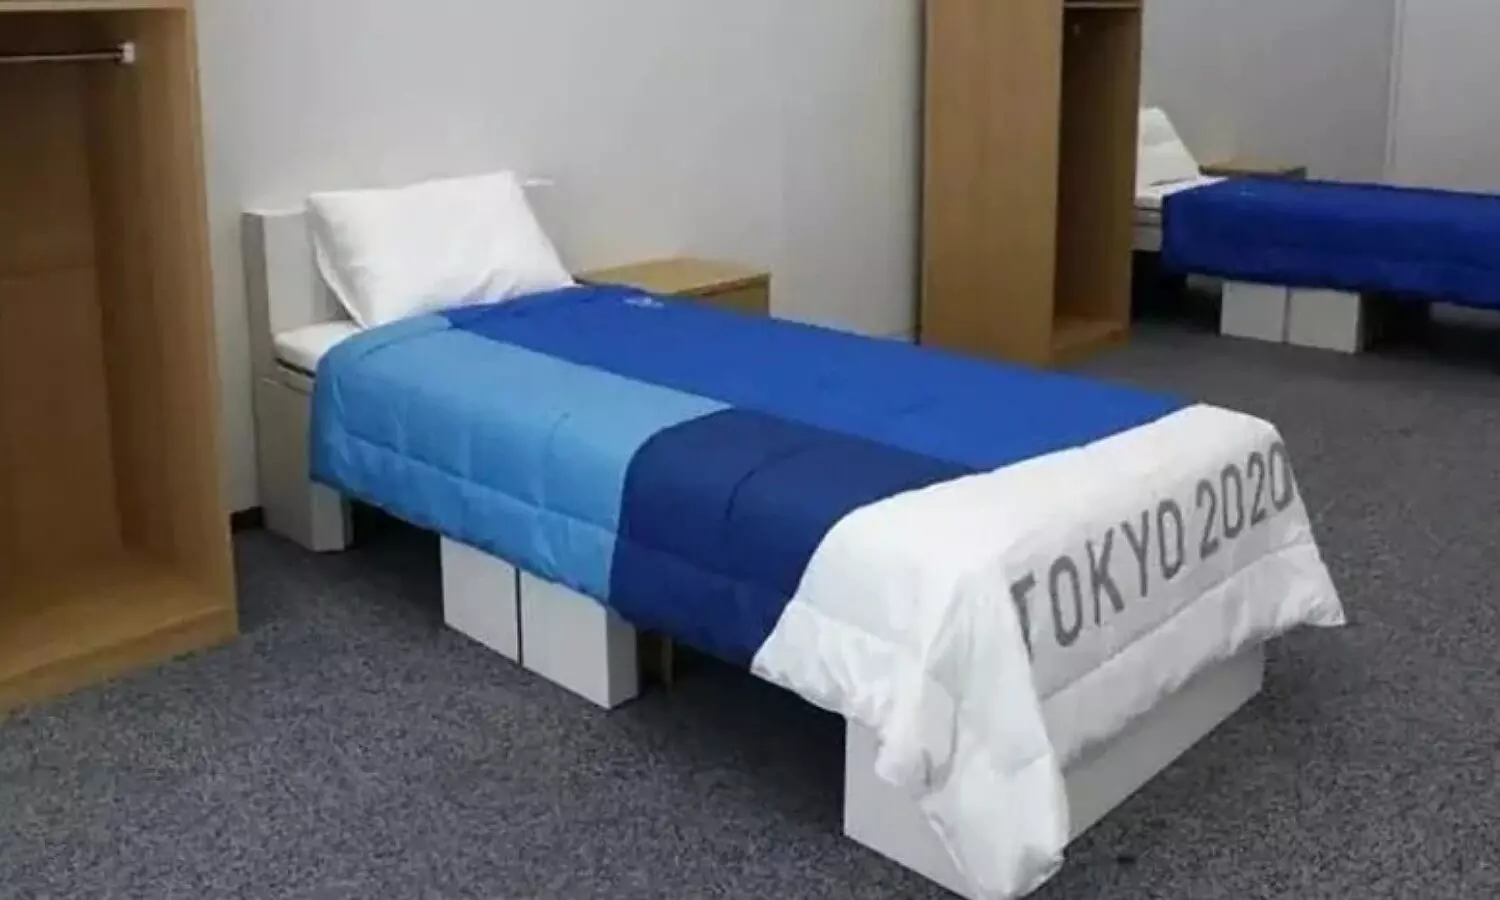 Anti Sex Beds install due to olympics